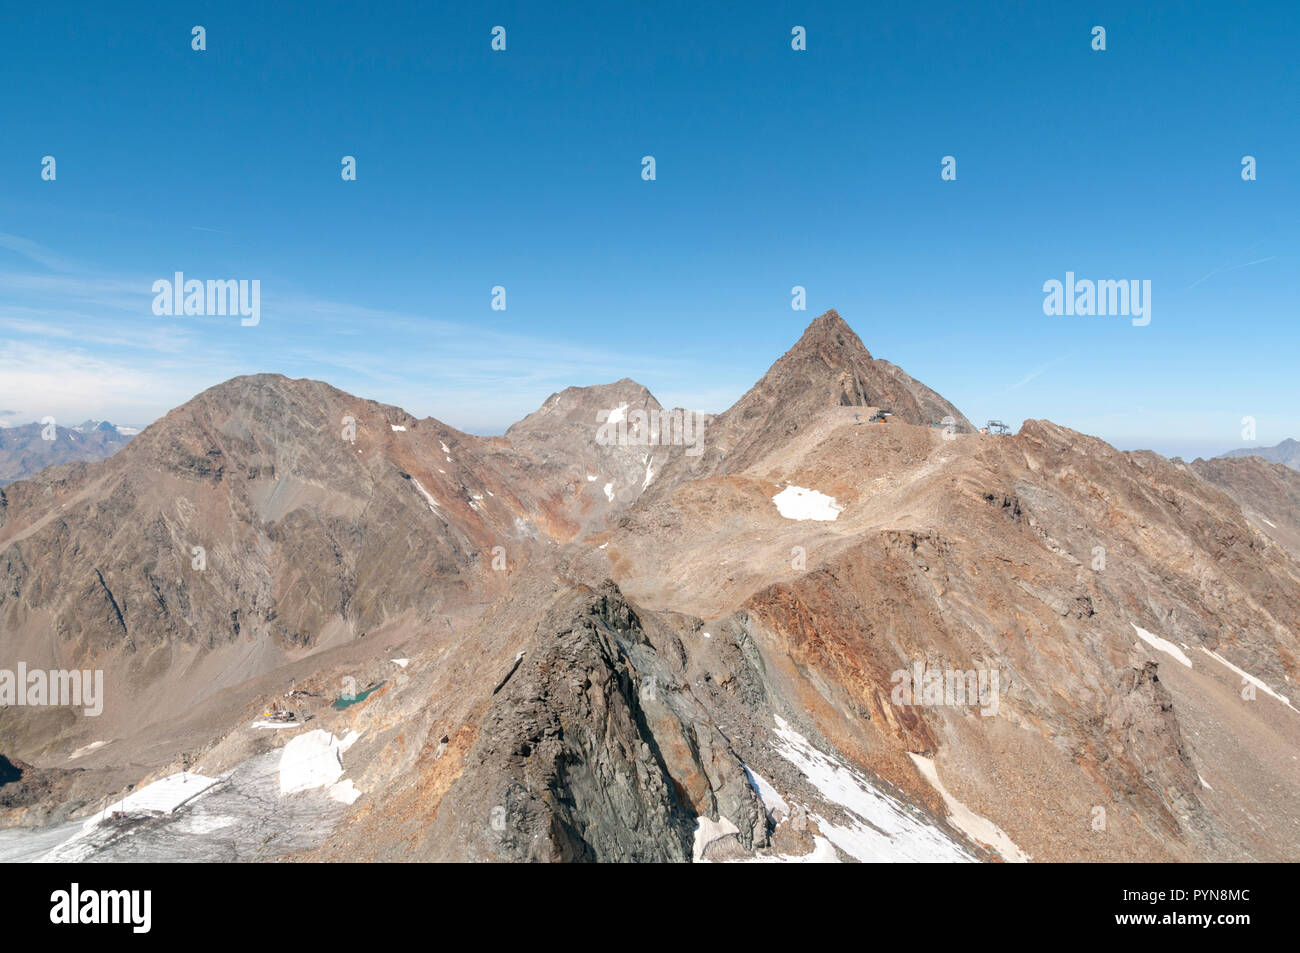 The Stubaier Wildspitze is a 3,341-metre-high mountain in the Stubai Alps in the Austrian state of Tyrol. Northeast of the summit lie two glaciers, th Stock Photo